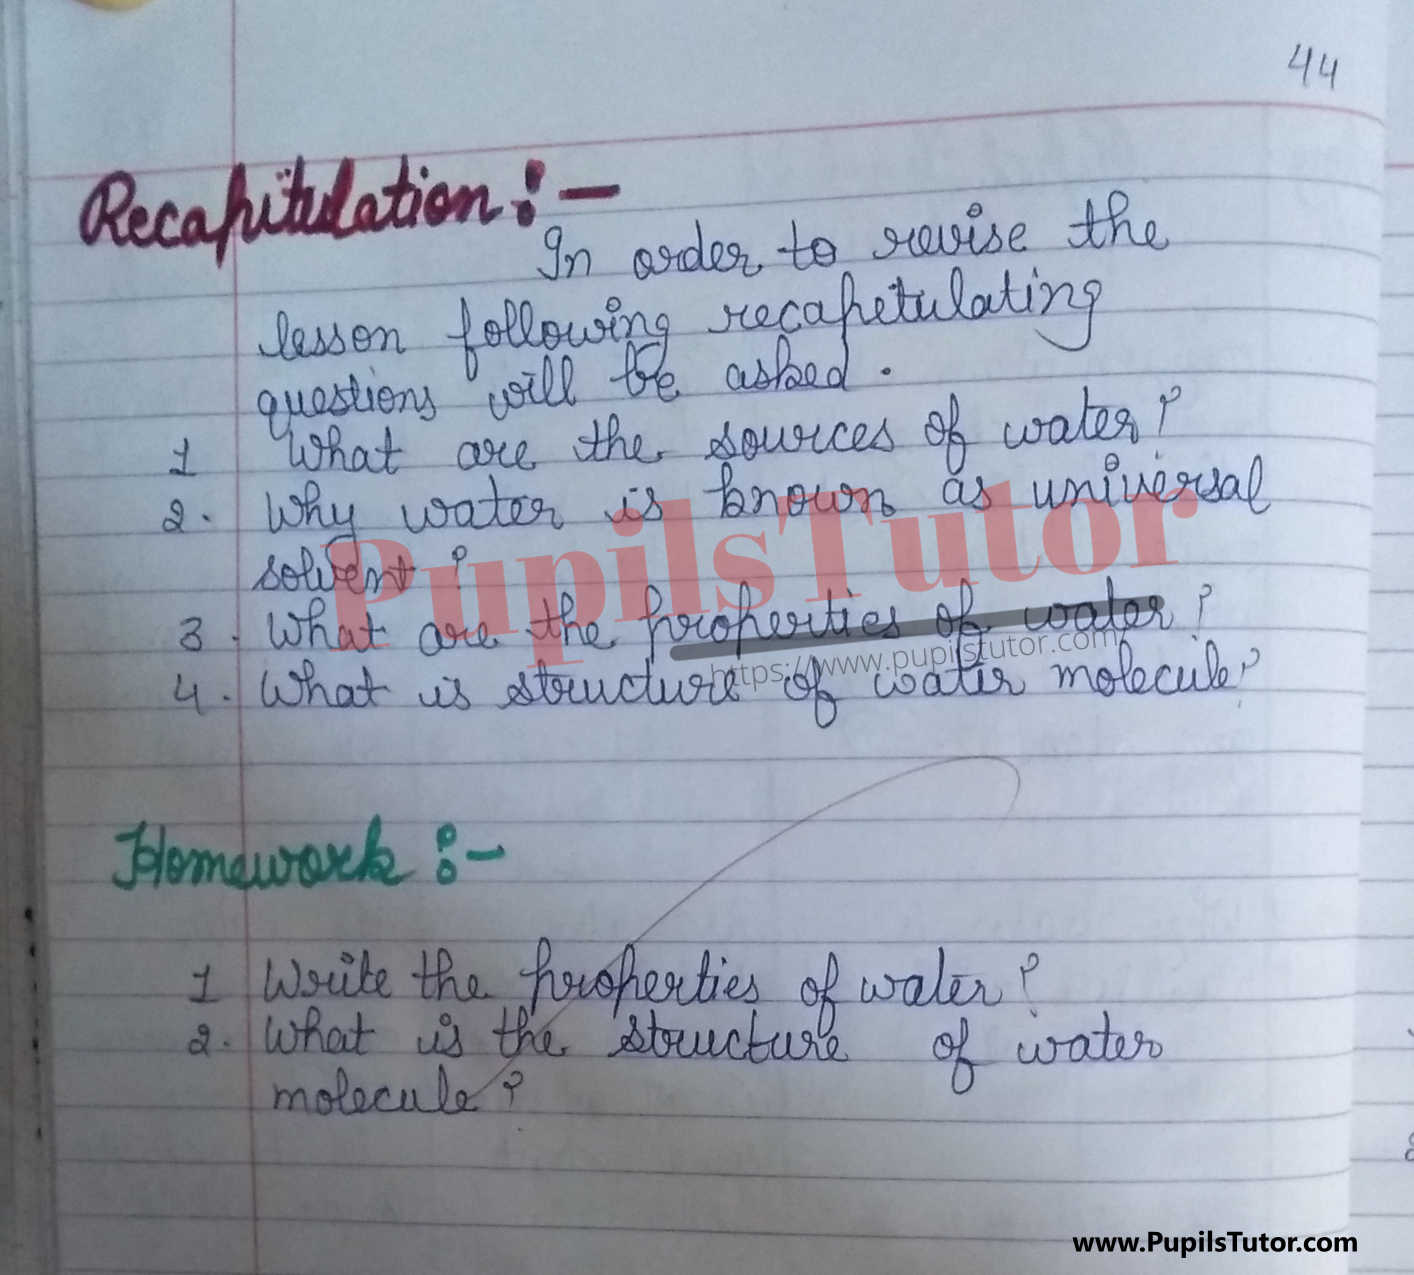 Properties And Molecular Structure Of Water Lesson Plan For B.Ed 1st Year, 2nd Year And All Semesters Students – [Page 6] – pupilstutor.com